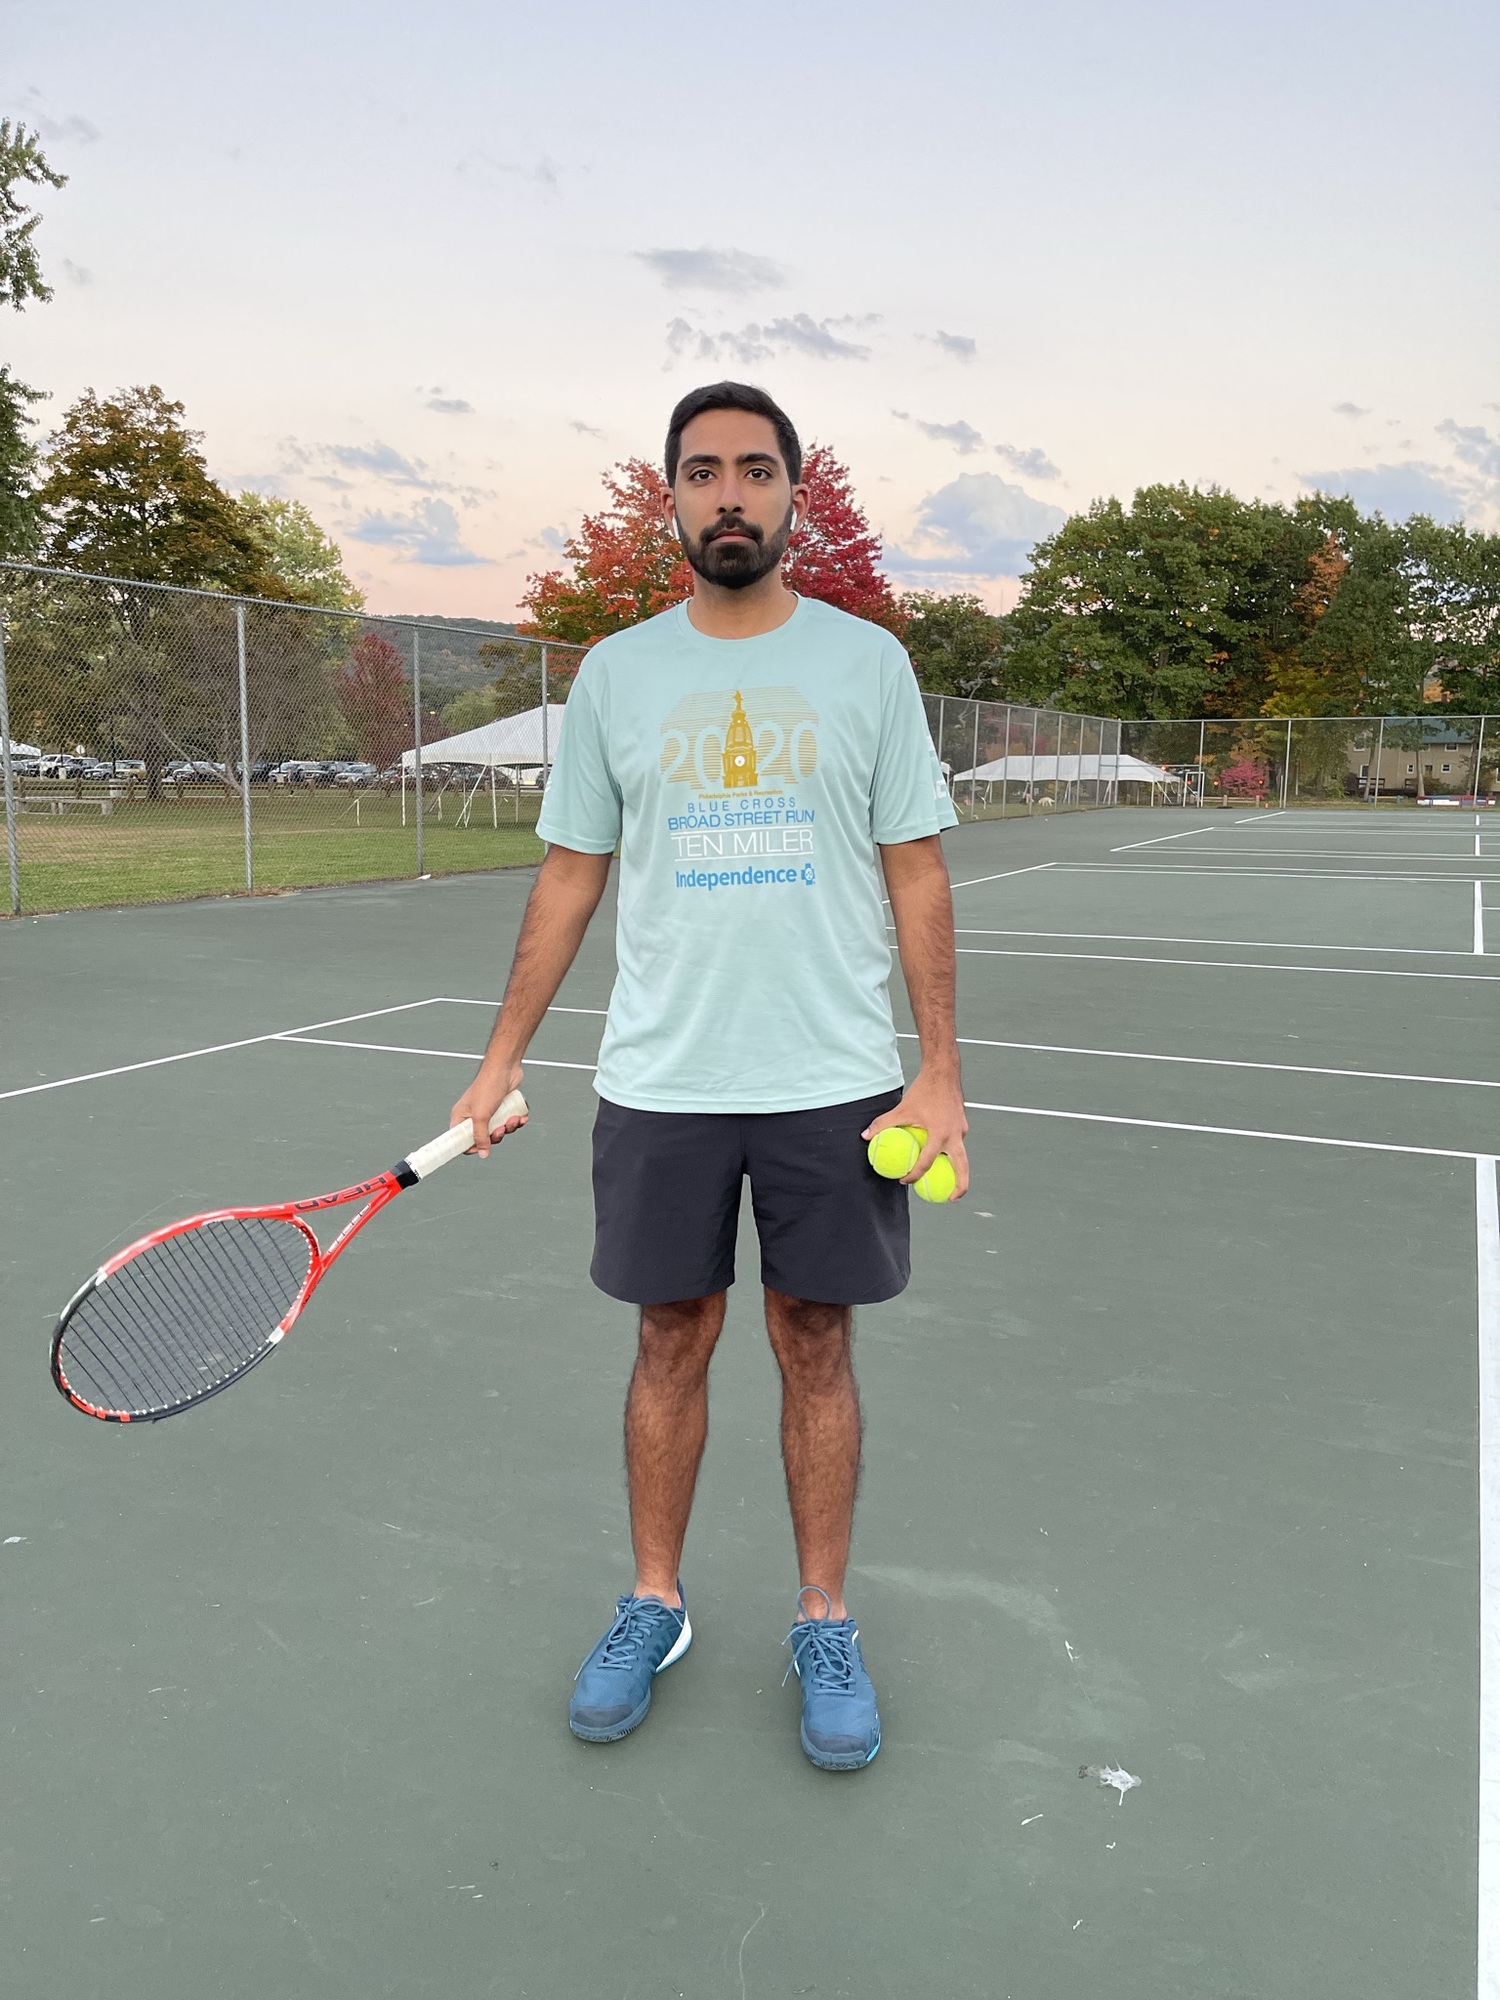 Kush S. teaches tennis lessons in West Lebanon, NH